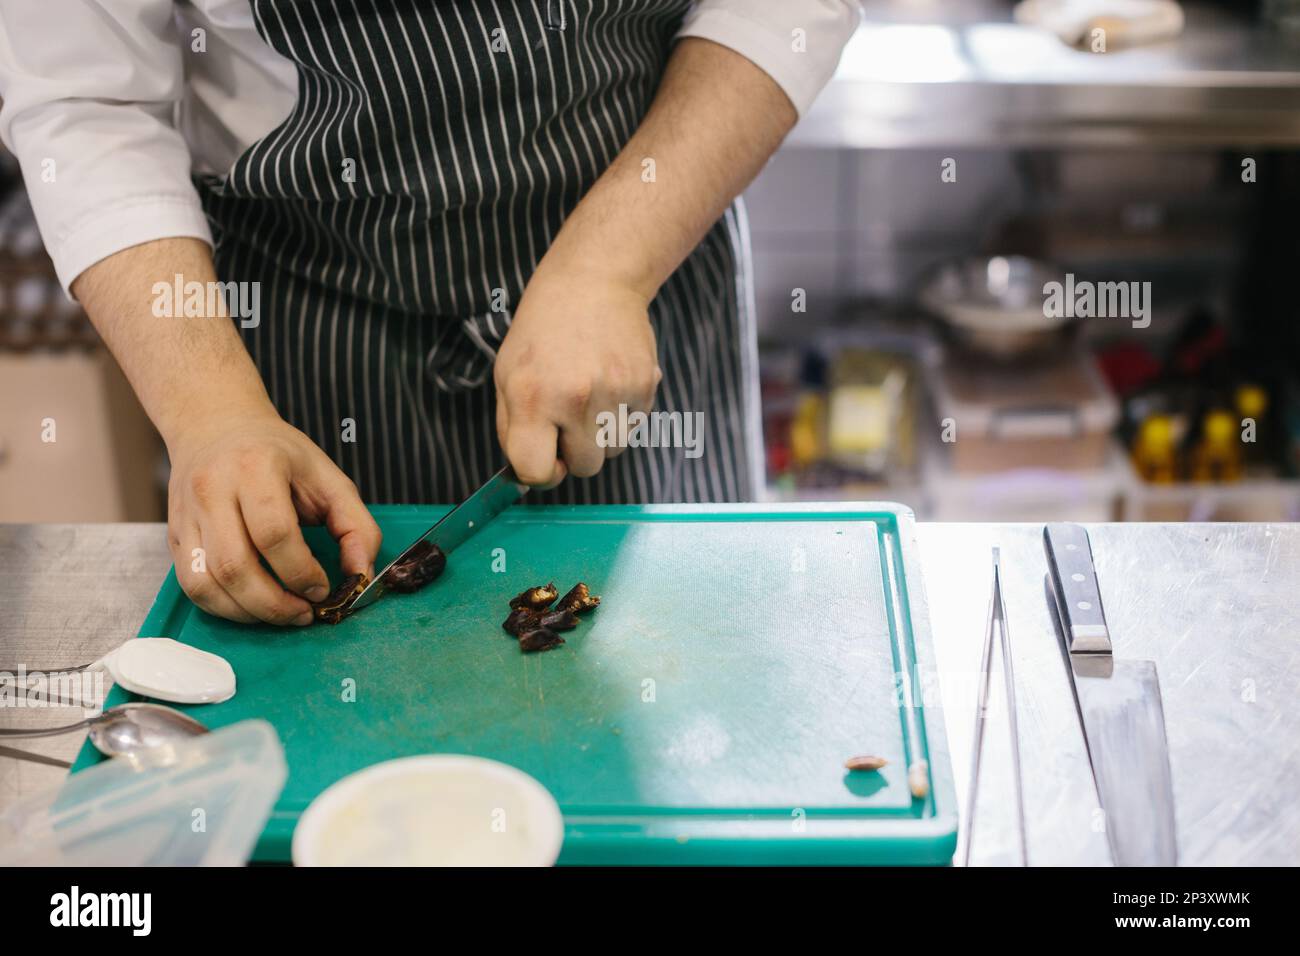 The process of making muesli in a restaurant, the male chef cuts dates in the kitchen. Stock Photo